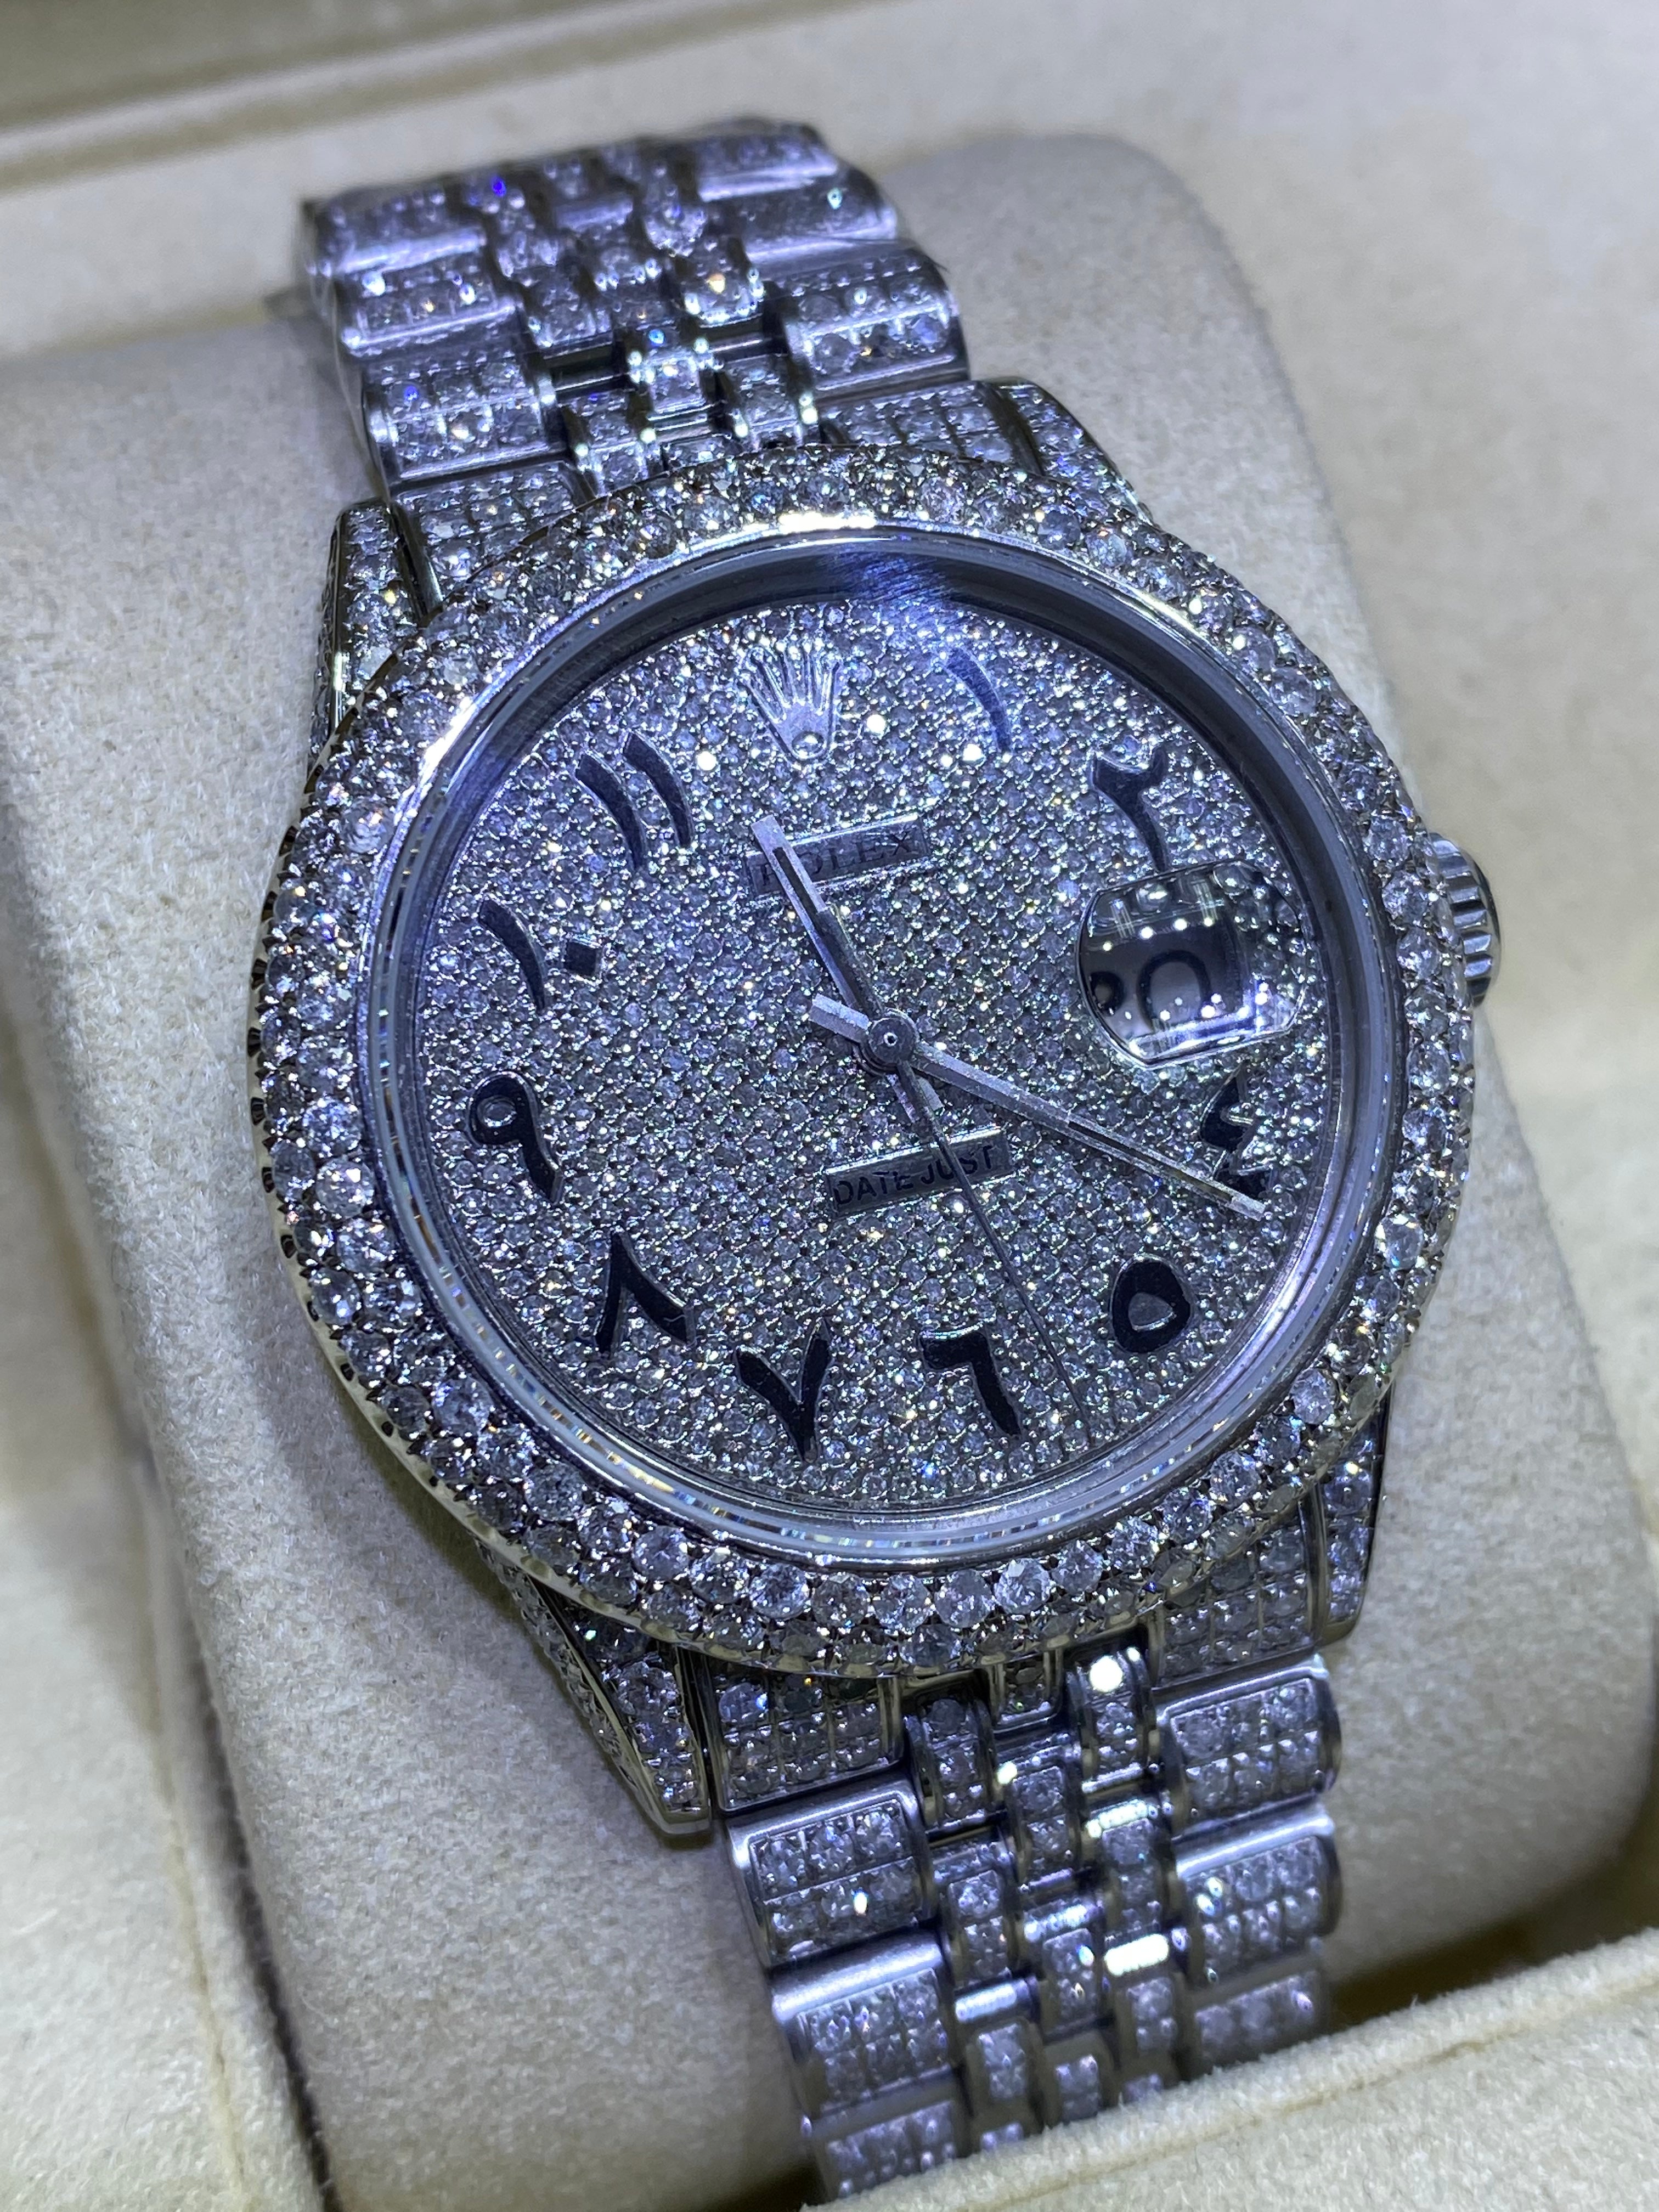 36mm rolex stainless steel#1601 double bezel “iced bustdown “ vs1 natural diamonds 💎 15cts.t.w.